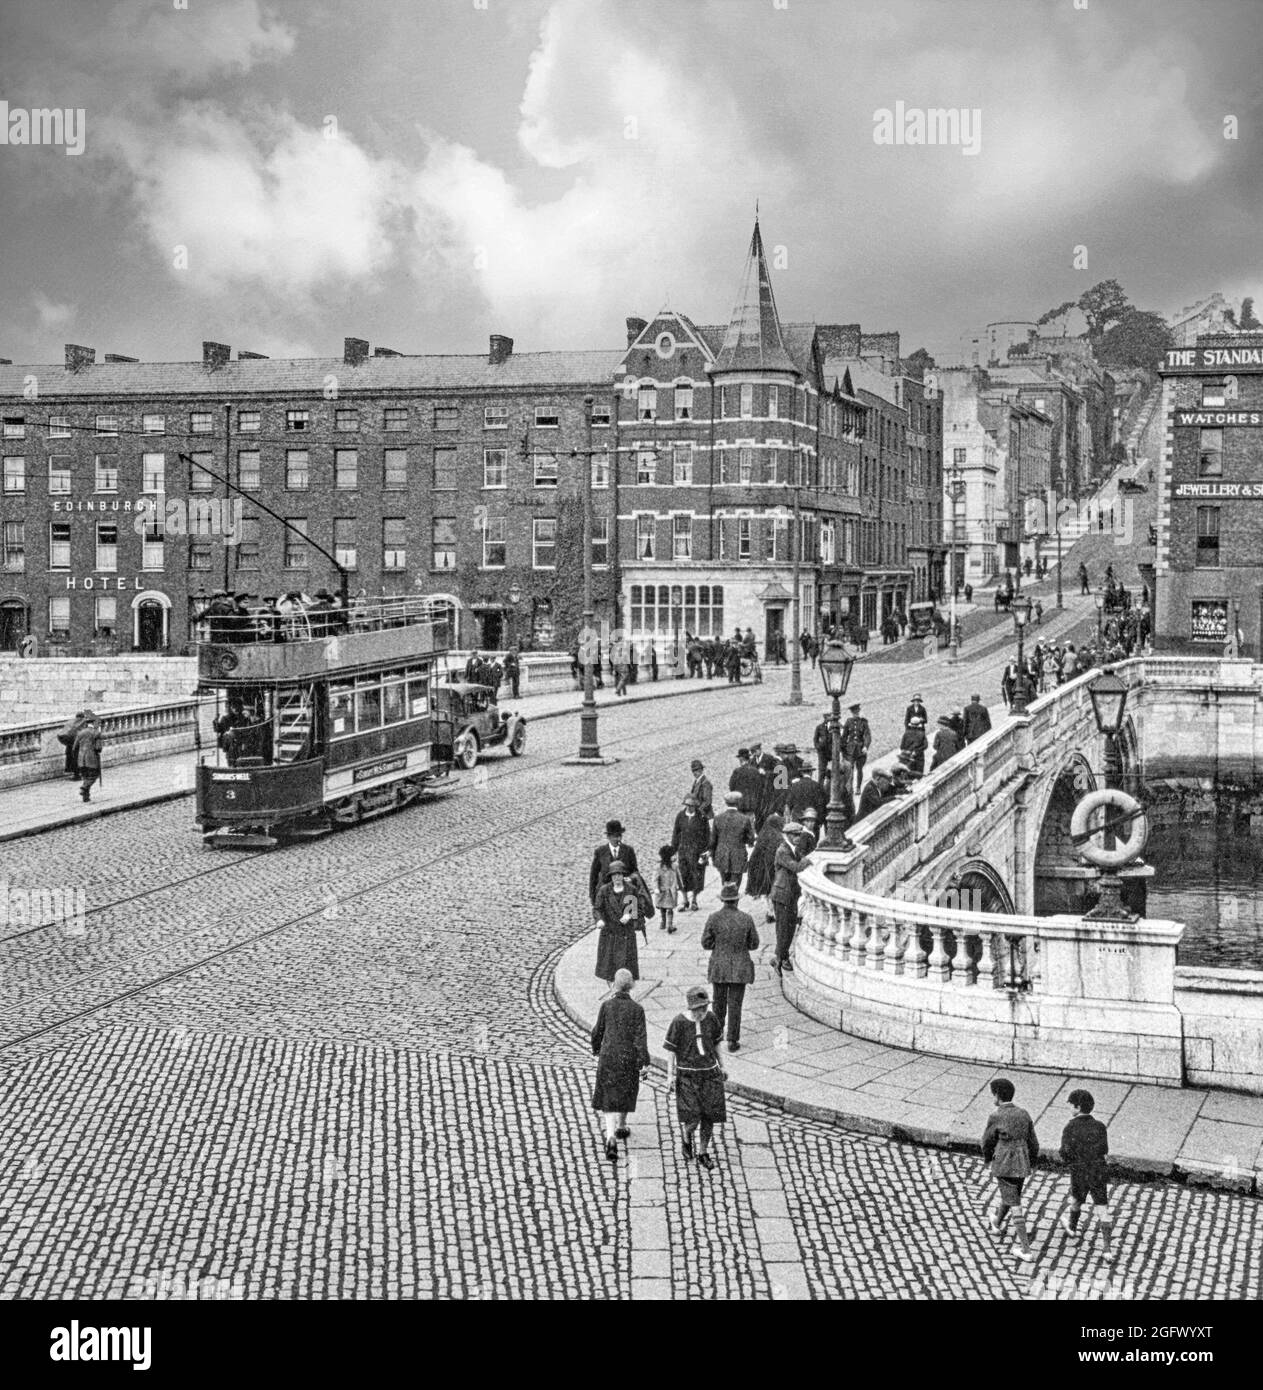 An early 20th century view of an electric tram crossing Patrick's Bridge over the River Lee in Cork City, Ireland. The first bridge, completed in 1789 and incorporating a portcullis to regulate ship traffic underneath the bridge was destroyed by a  severe flood in 1853. A temporary timber bridge, was put in place and the present bridge opened in 1861, remains one of the best-known landmarks in Cork. Stock Photo